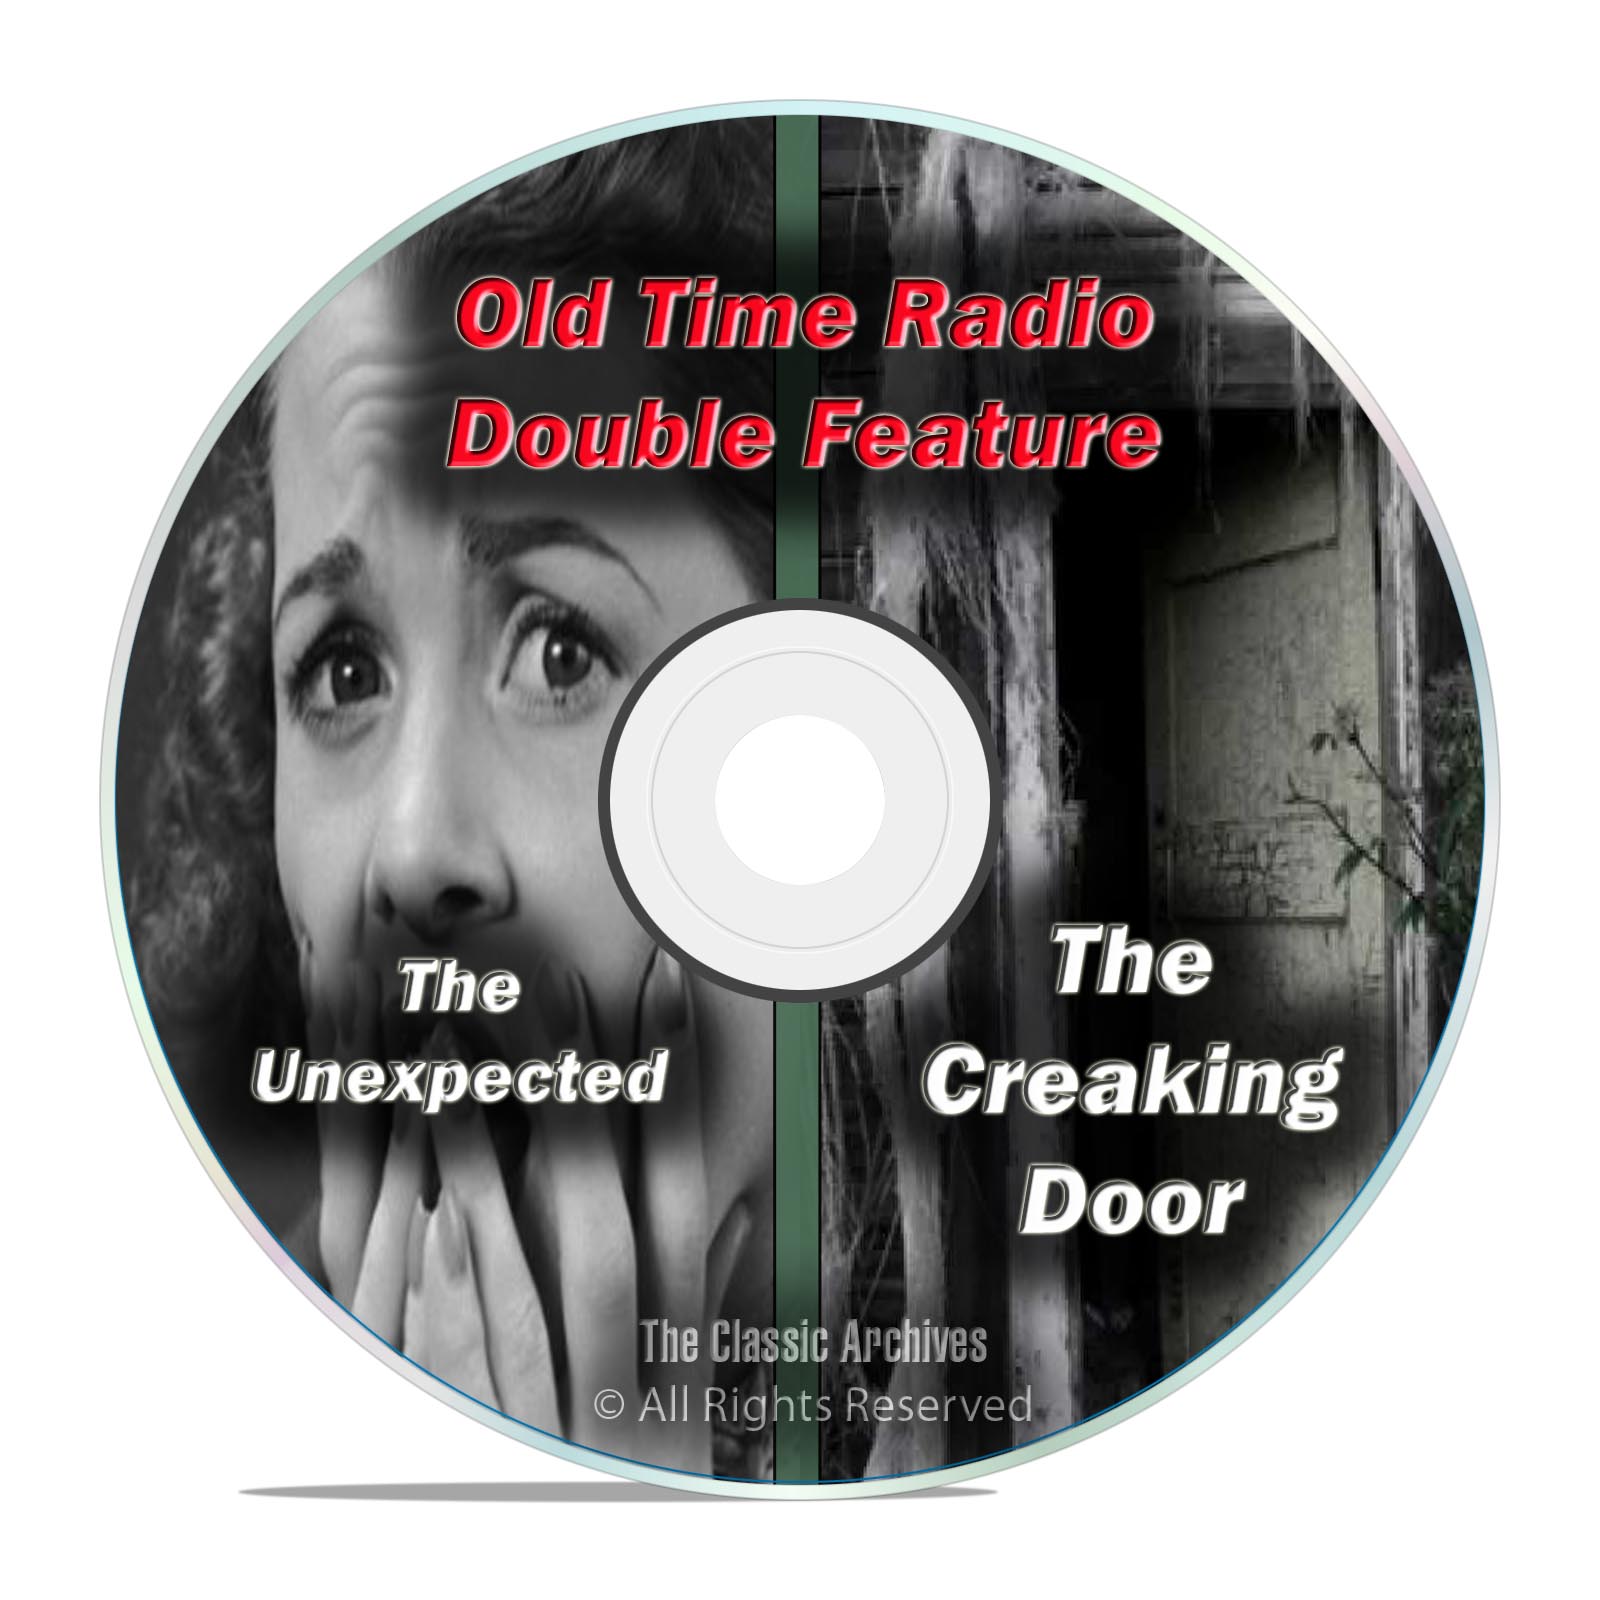 THE CREAKING DOOR & THE UNEXPECTED, 303 shows, FULL SET, Old Time Radio DVD